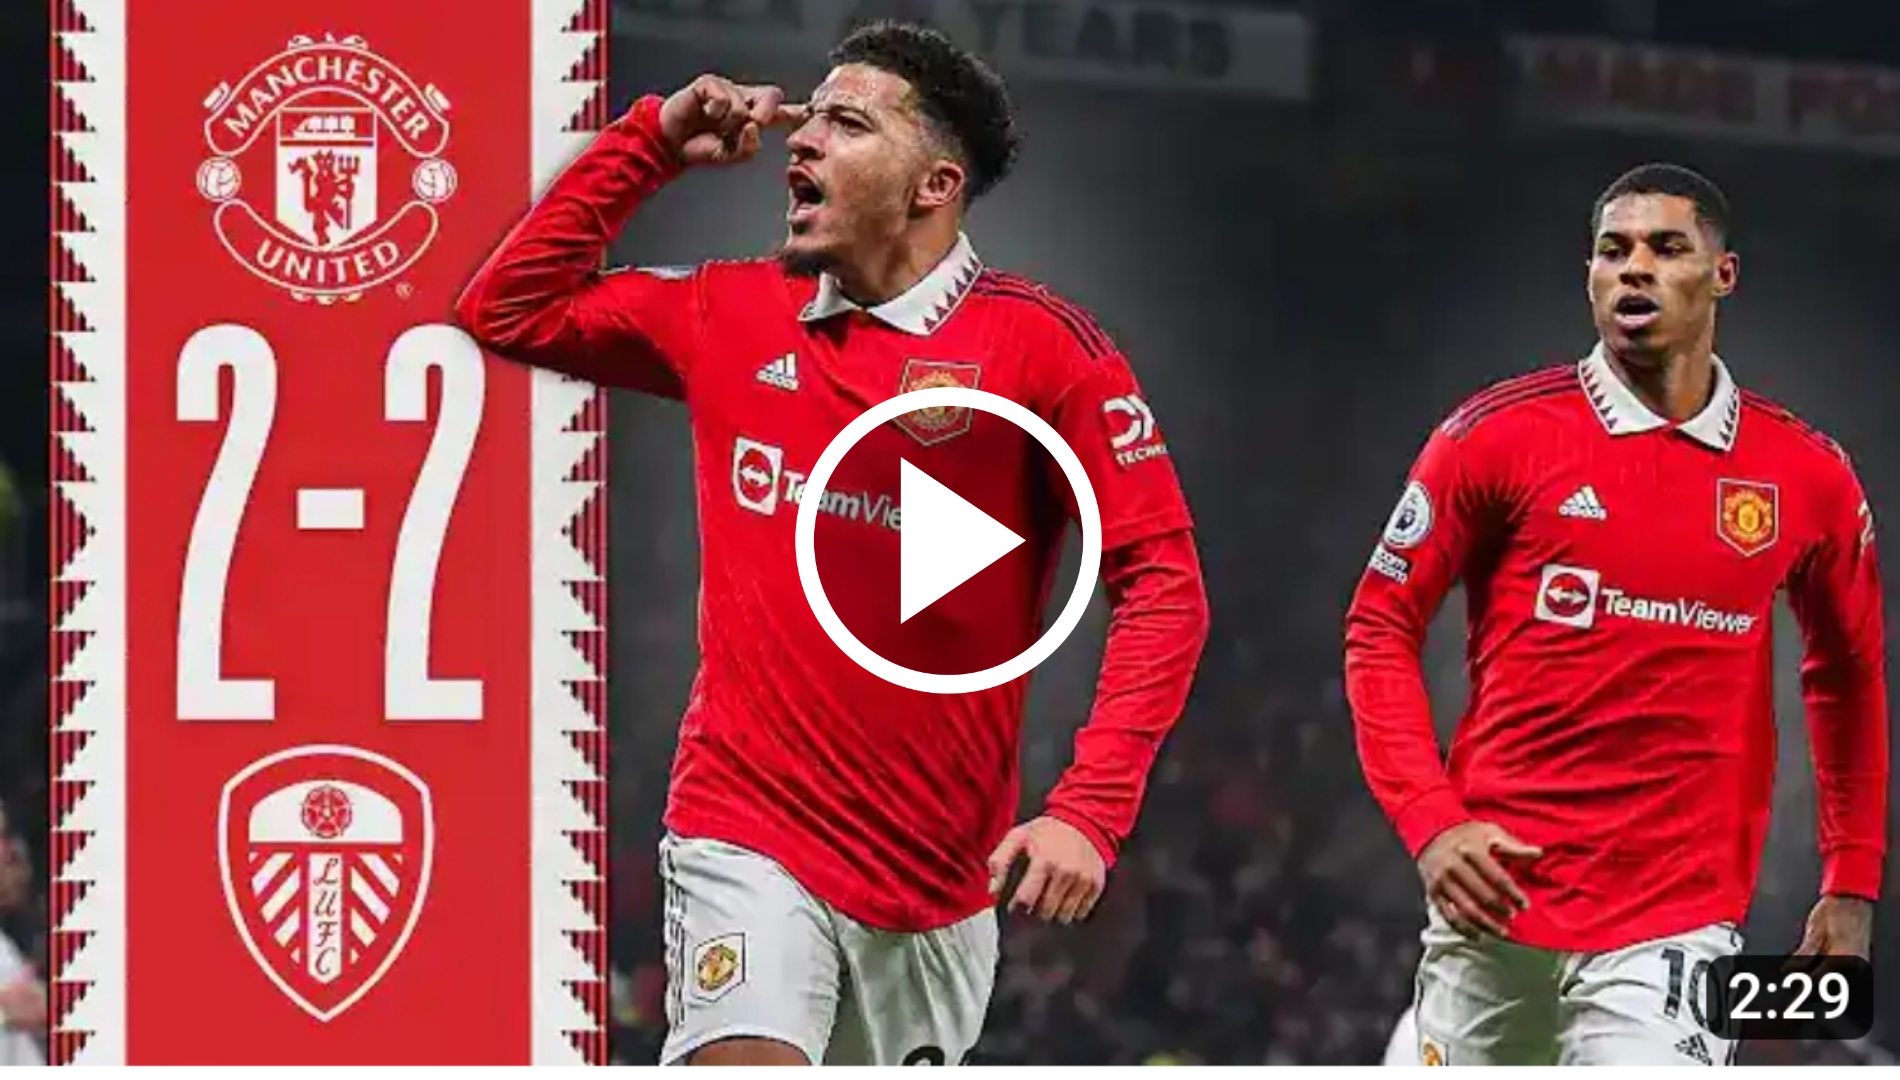 Highlights: Watch Man United vs Leeds united (2-2) extended highlights and goals 10 Sportelo